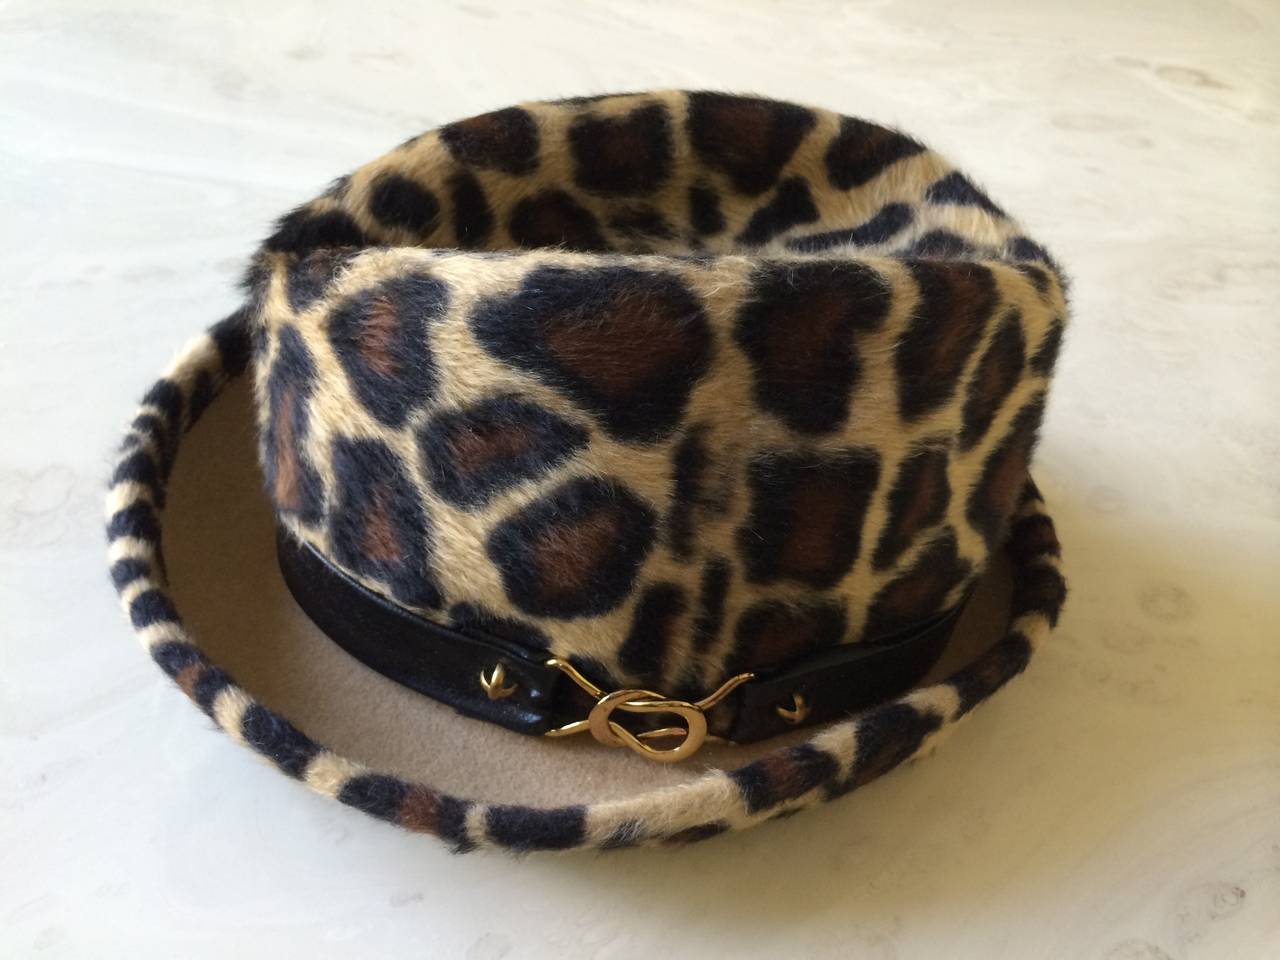 Vintage Yves Saint Laurent Leopard Print Hat.
Black leather  band with gold hardware trims this leopard print felt hat.
Approximate measurements. Front to back inside hat 7 1/2 inches
Inner circumference. 21/ 22 inches. Excellent Condition.